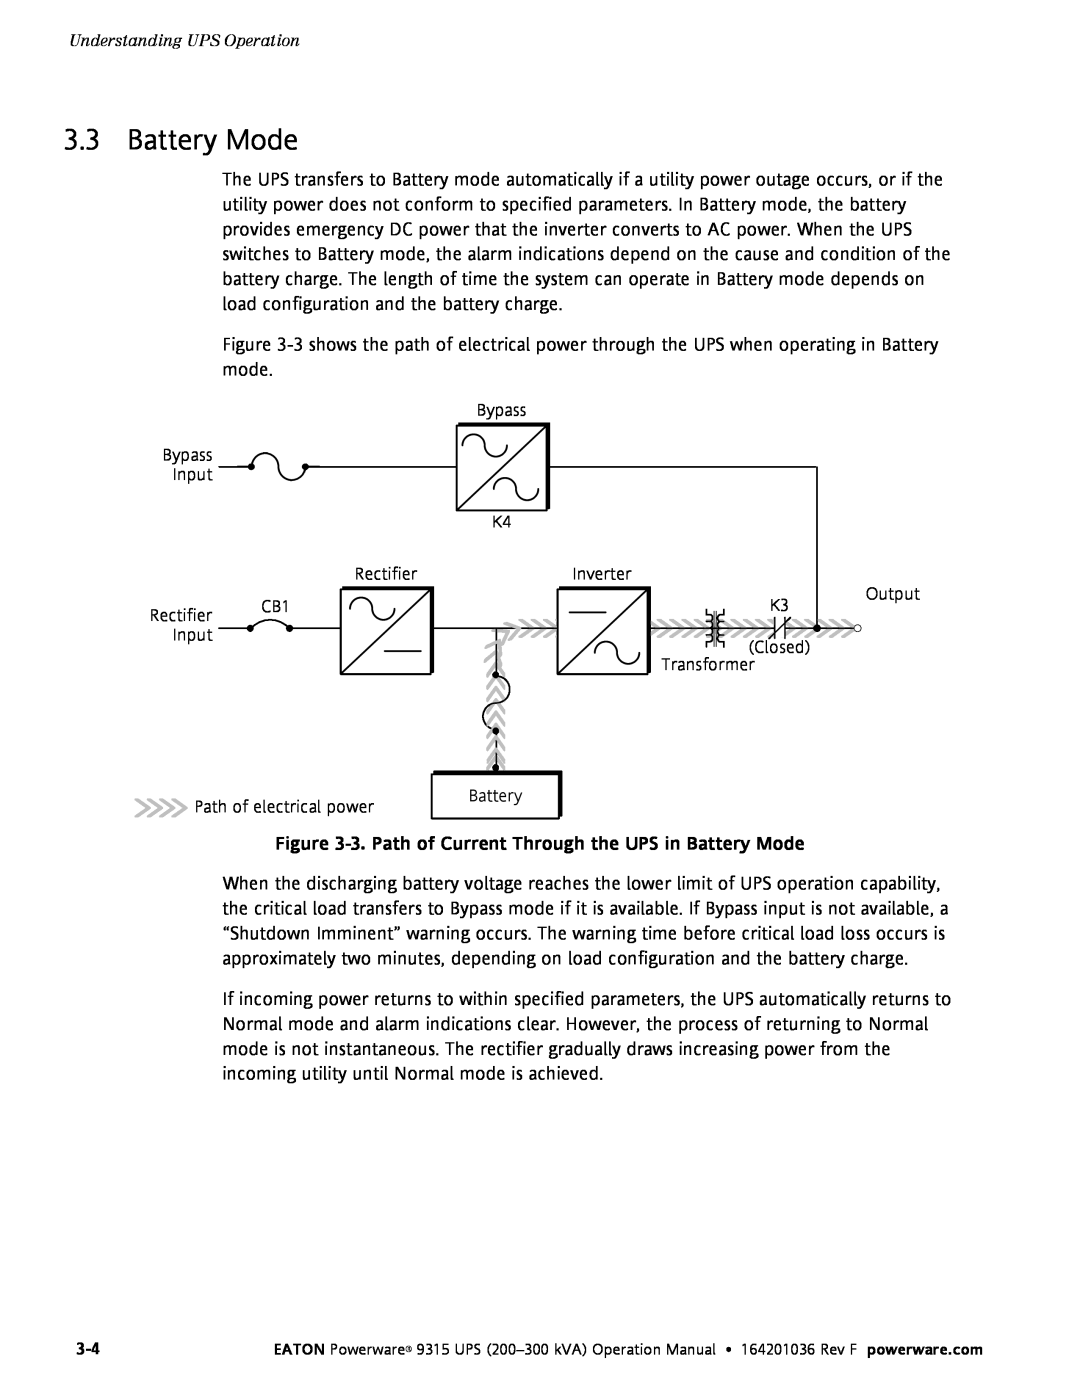 Eaton Electrical Powerware 9315 operation manual 3. Path of Current Through the UPS in Battery Mode 